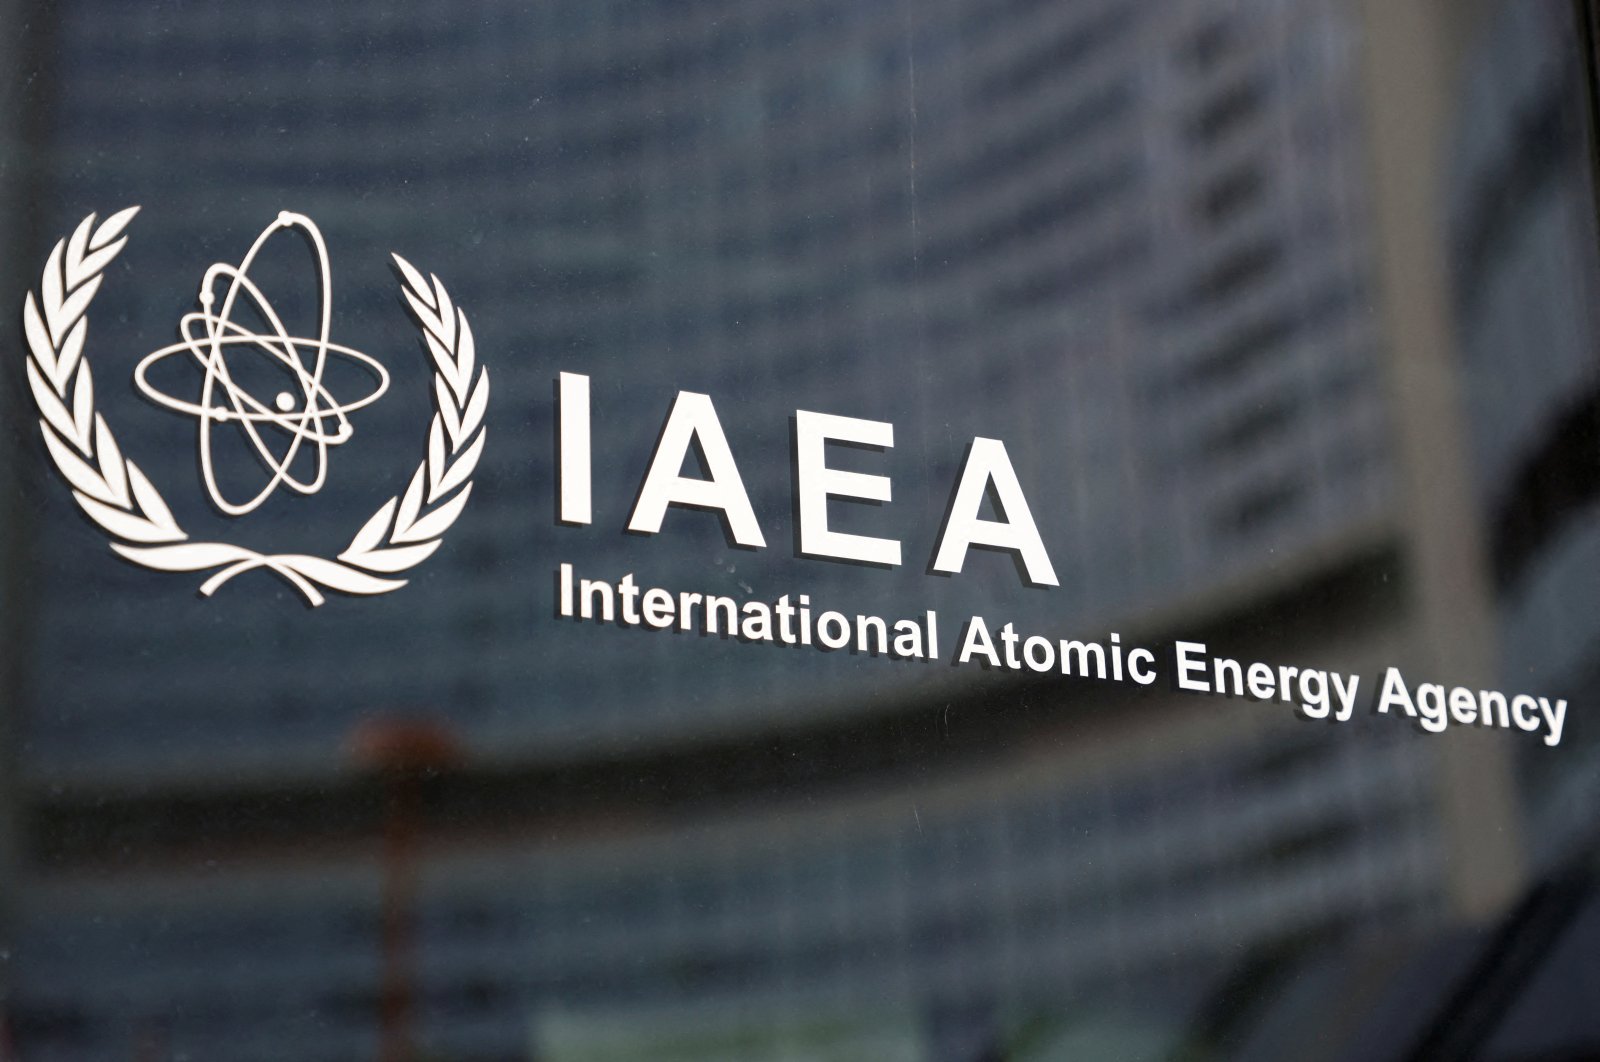 The logo of the International Atomic Energy Agency (IAEA) is seen at its headquarters, Vienna, Austria, March 6, 2023. (Reuters Photo)